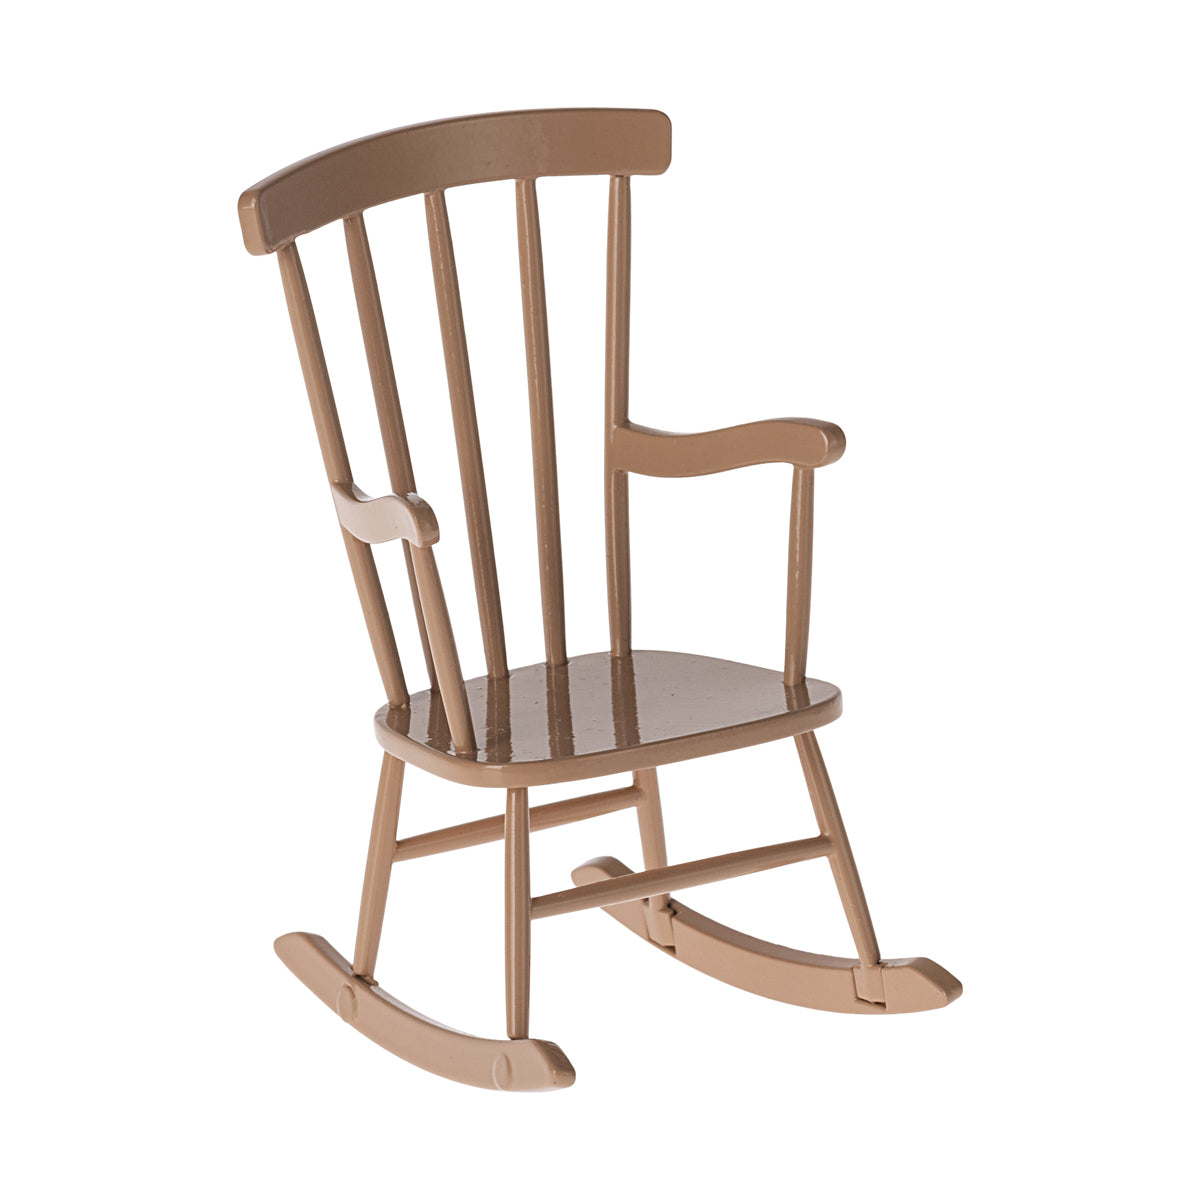 NEW Maileg Mouse Rocking Chair - Powder